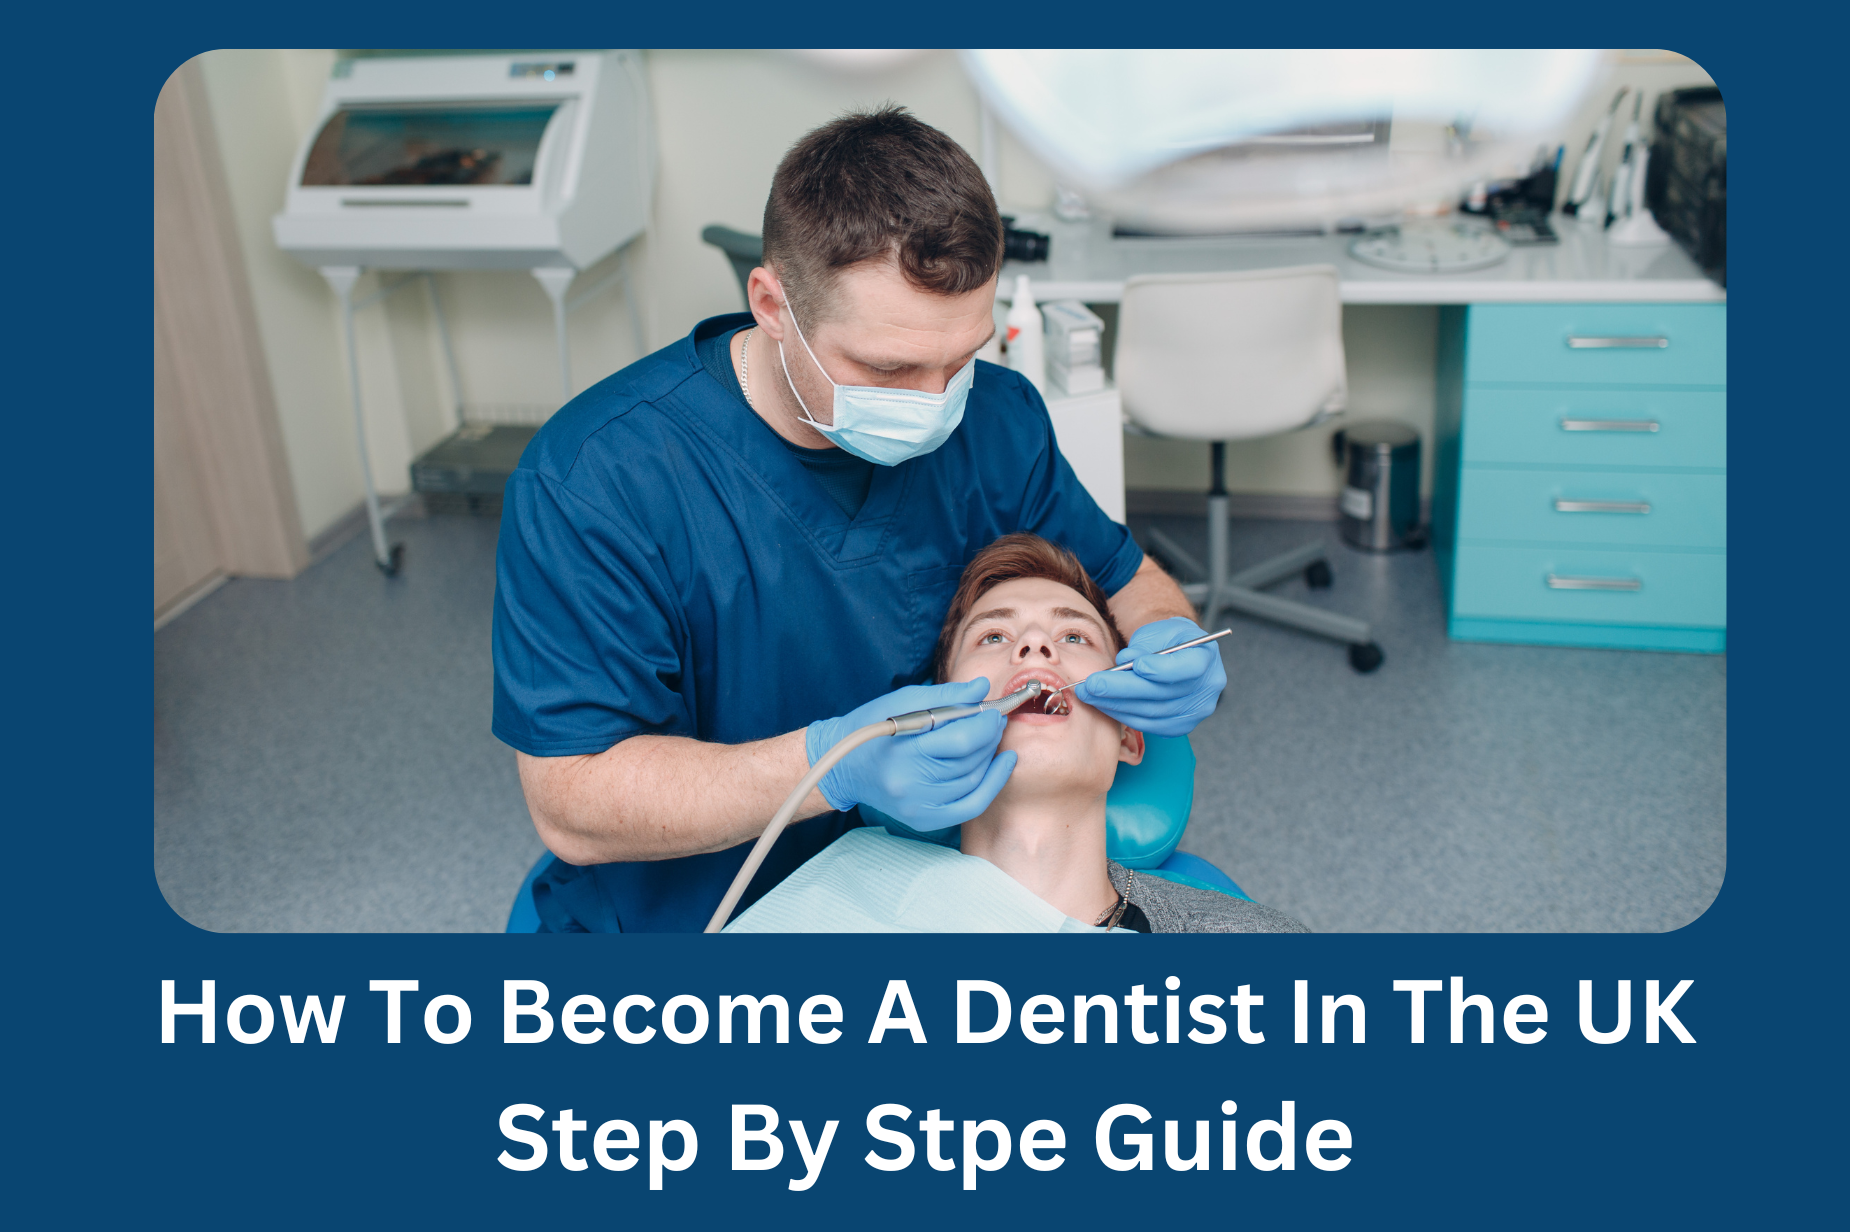 How To Become A Dentist In The UK? Step By Step Guide